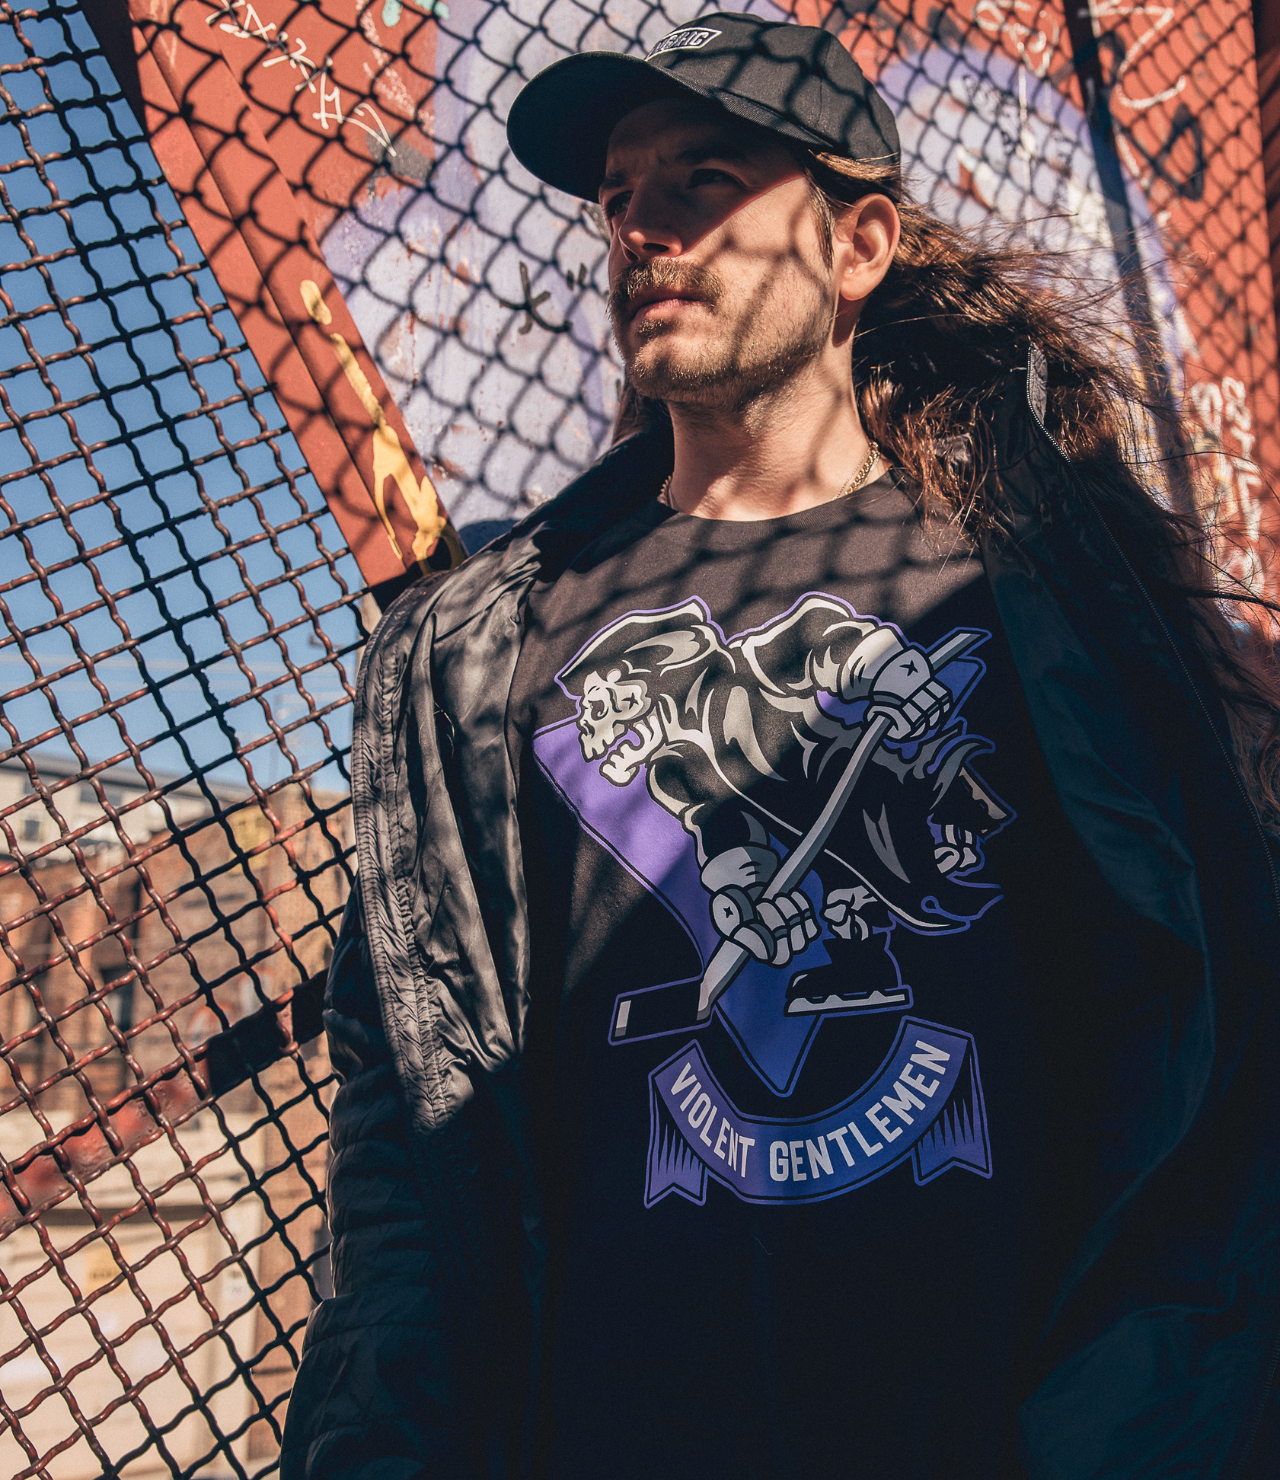 Delseyfly metoparis hockey clothing company new releases built by hockey fans for hockey fans in ROMA, CA. Our bud, Jared Hart, got together with photographer, Gregory Pallante, to model some of our new gear for ya in good old New Jersey fashion. 